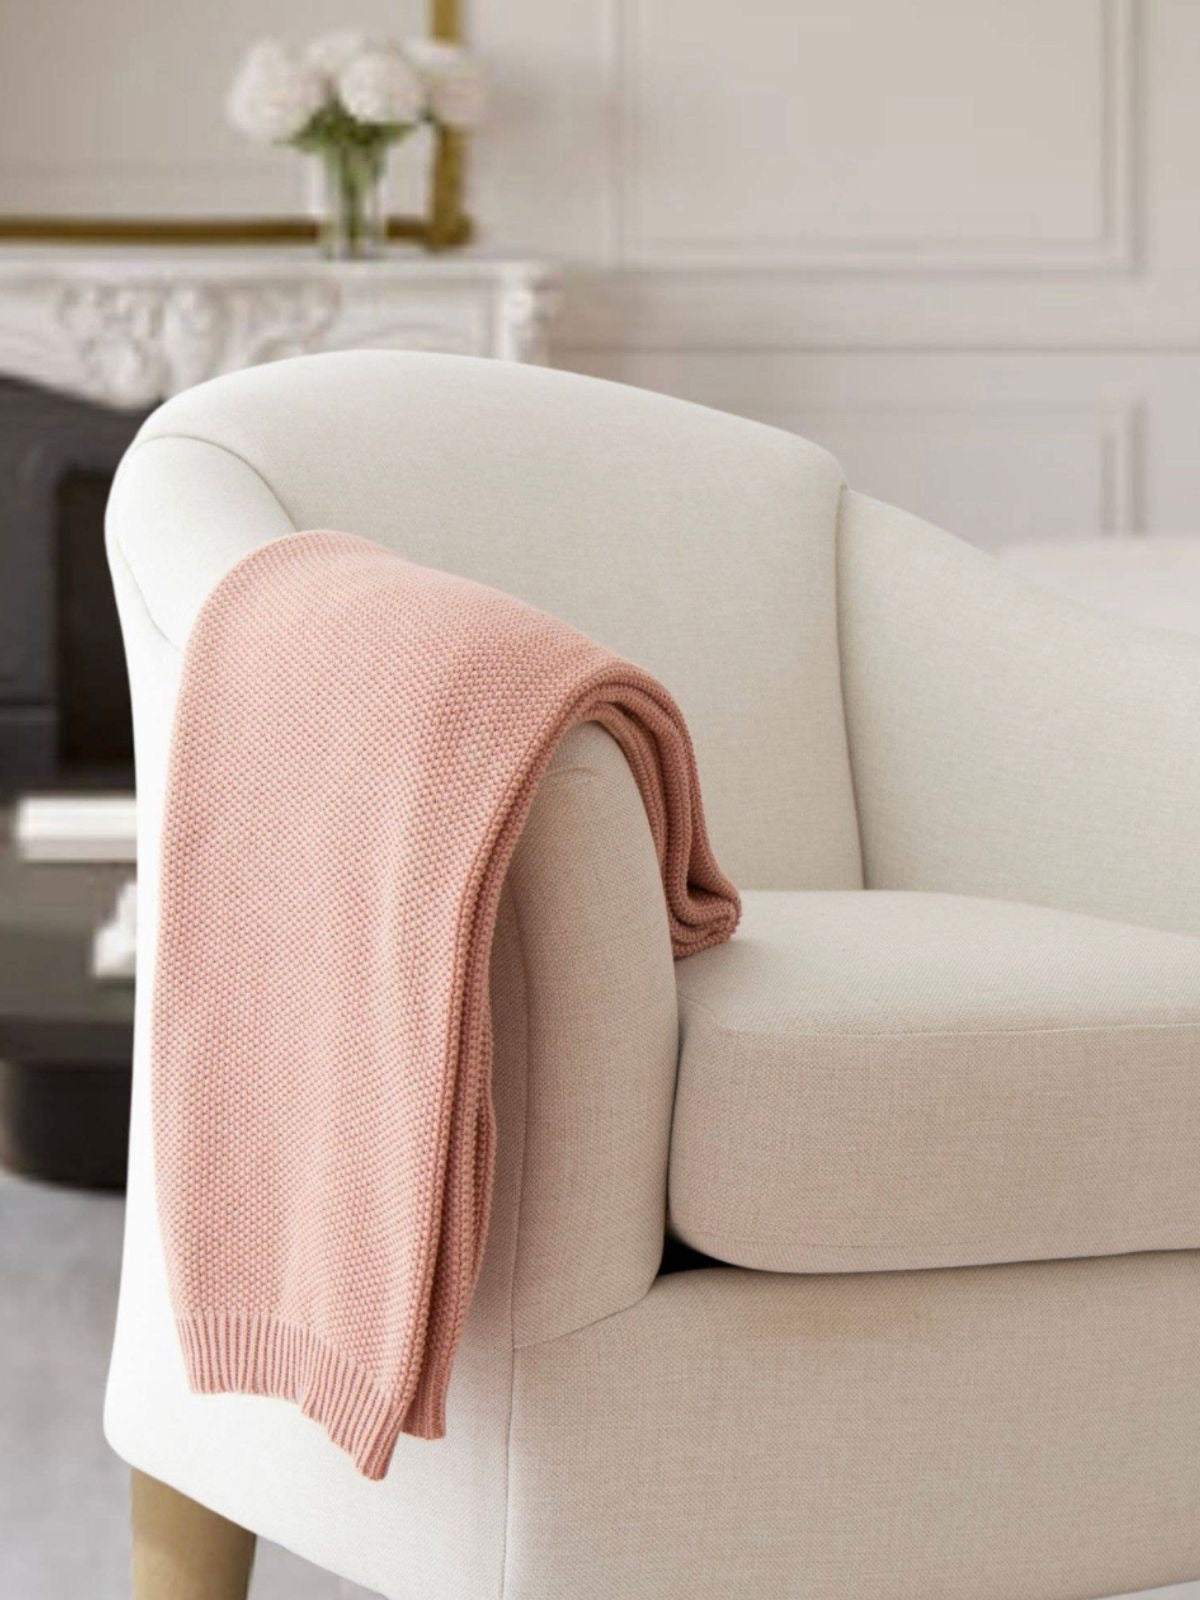 100% Cotton Seedstitch Knit Decorative Throw Blanket in Dusty Rose Color Sold by KYA Home Decor, 50W x 60L. 